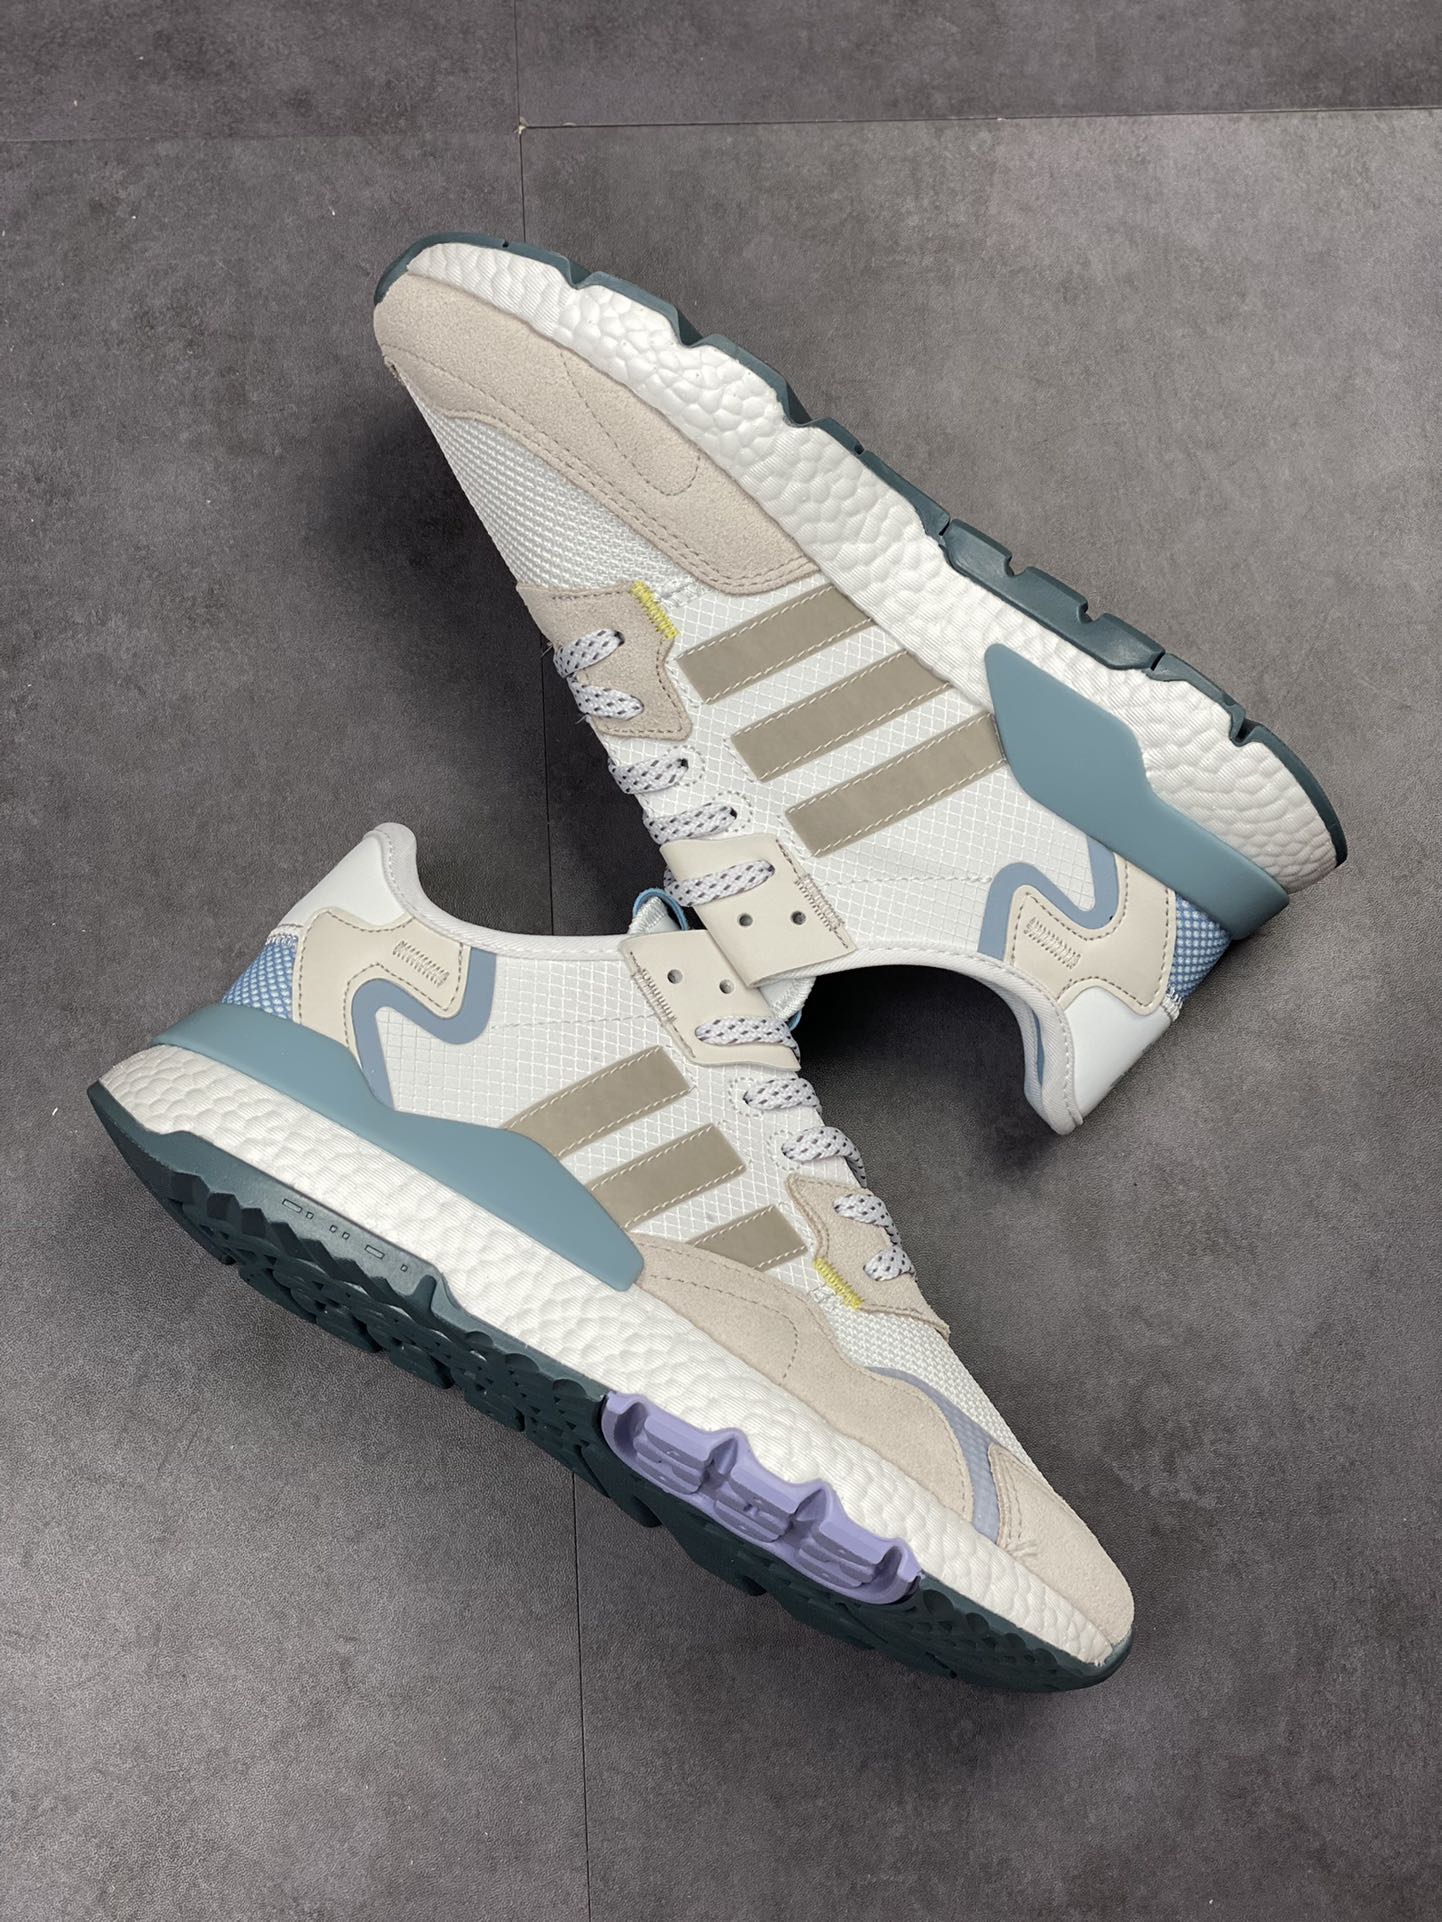 Adidas Nite Jogger 2019 Boost Clover Joint Night Walker IF0419